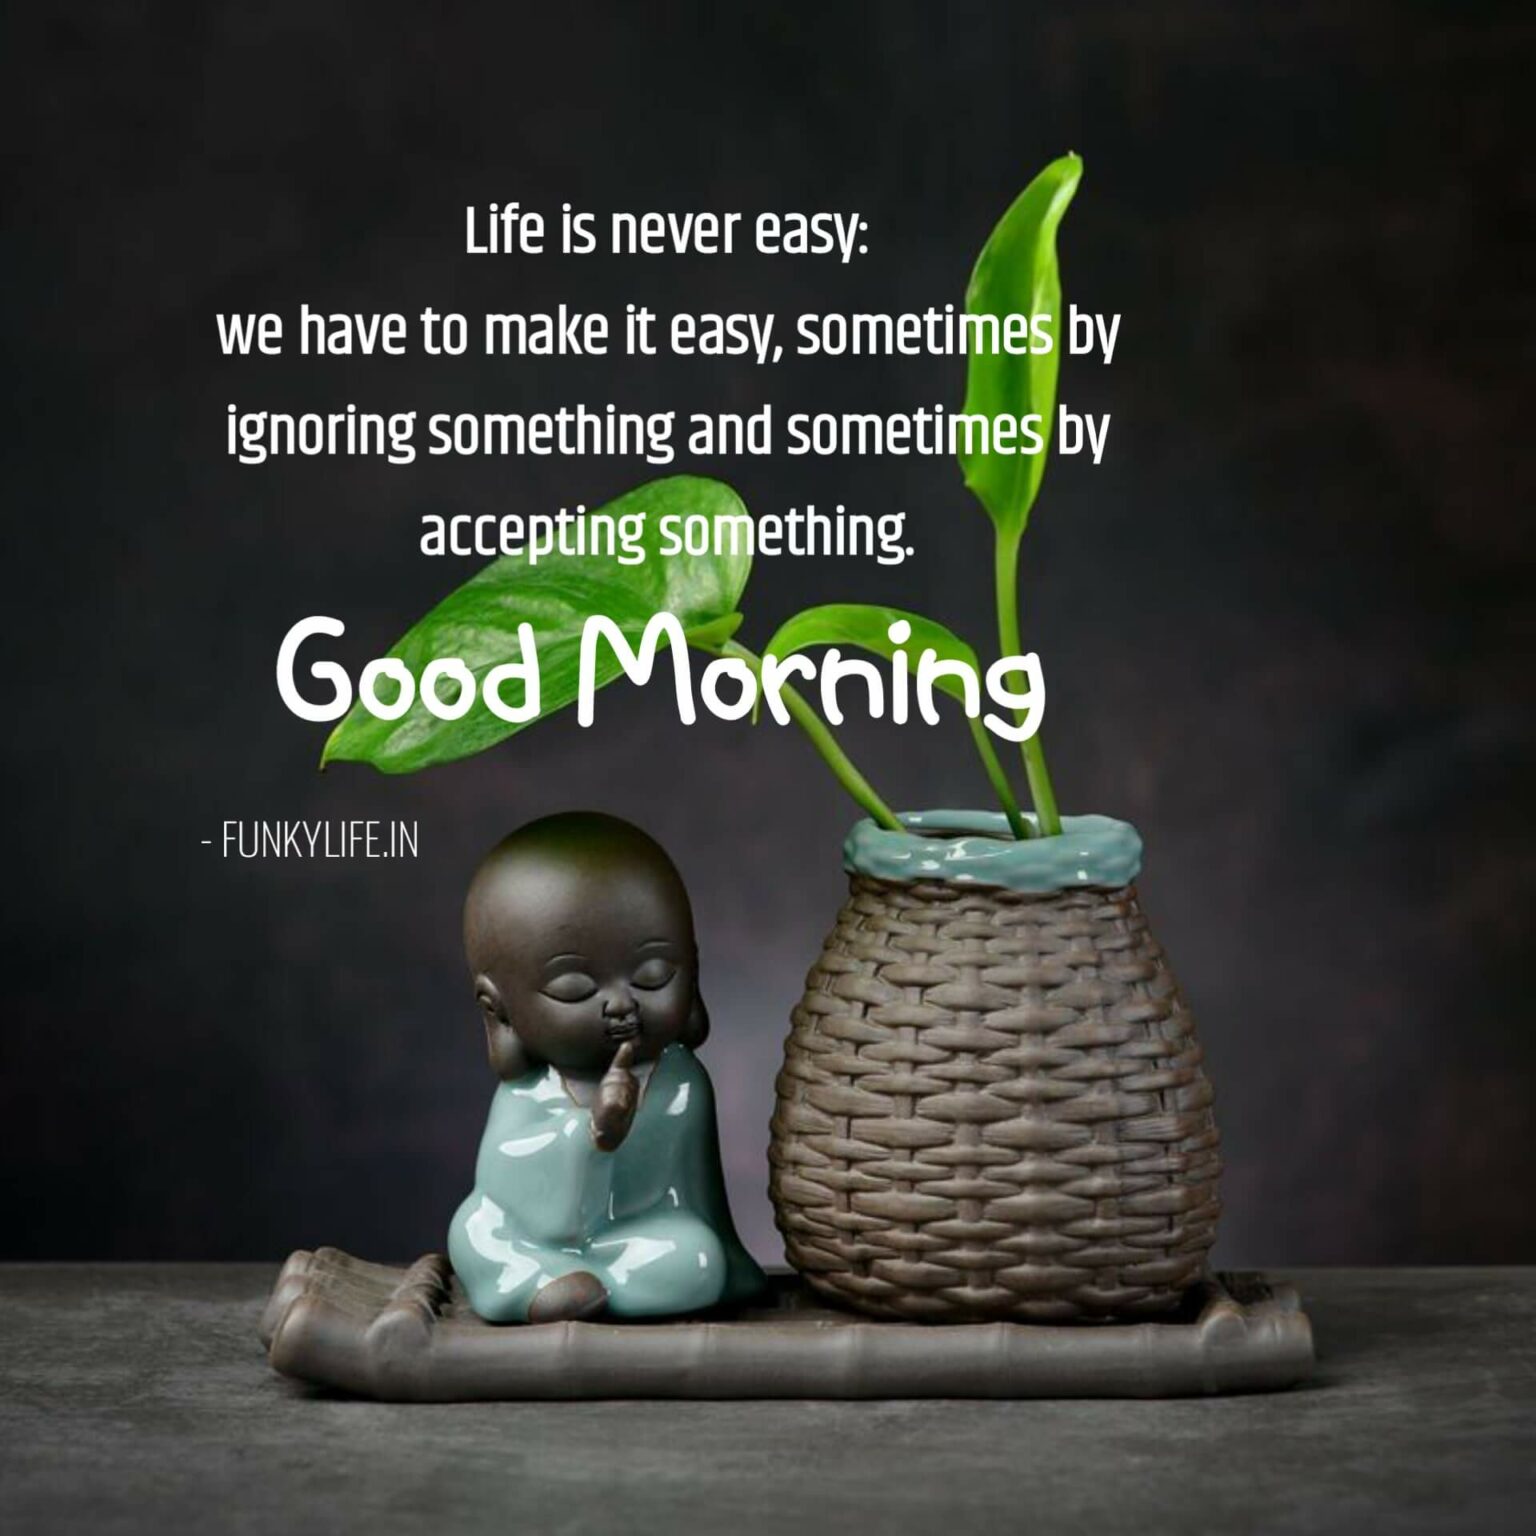 Good Morning Quotes 15 1536x1536 